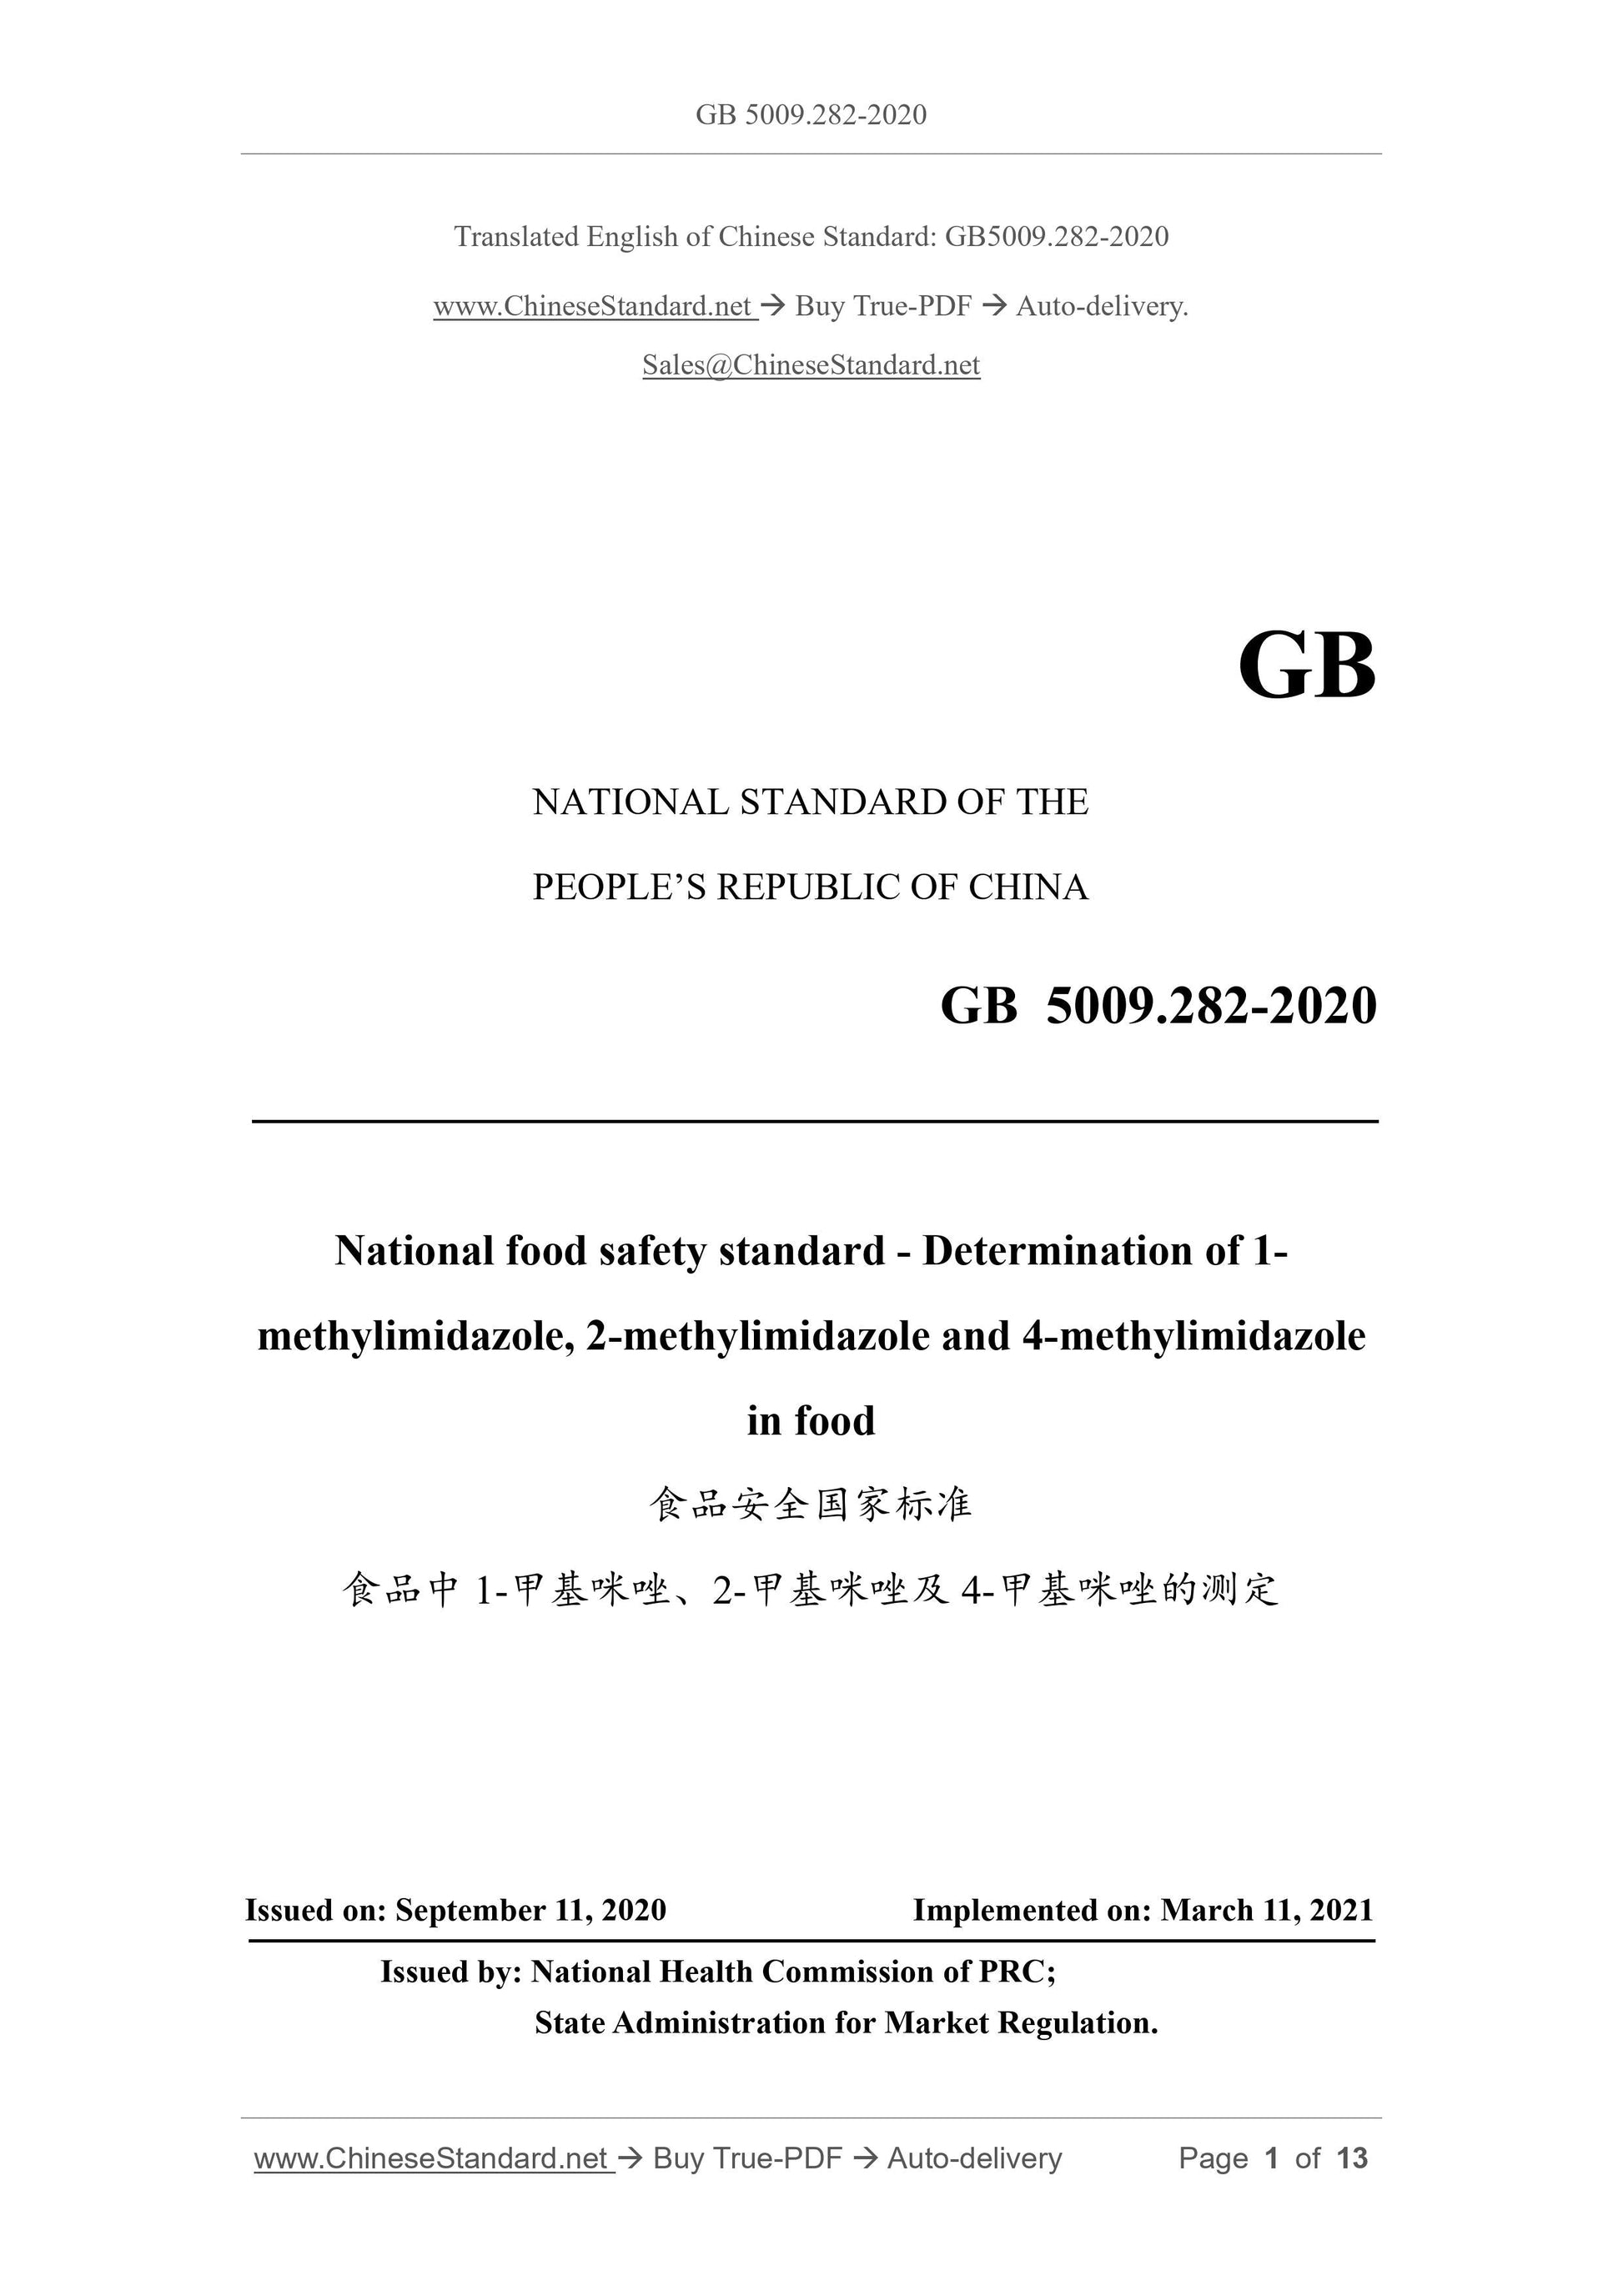 GB 5009.282-2020 Page 1